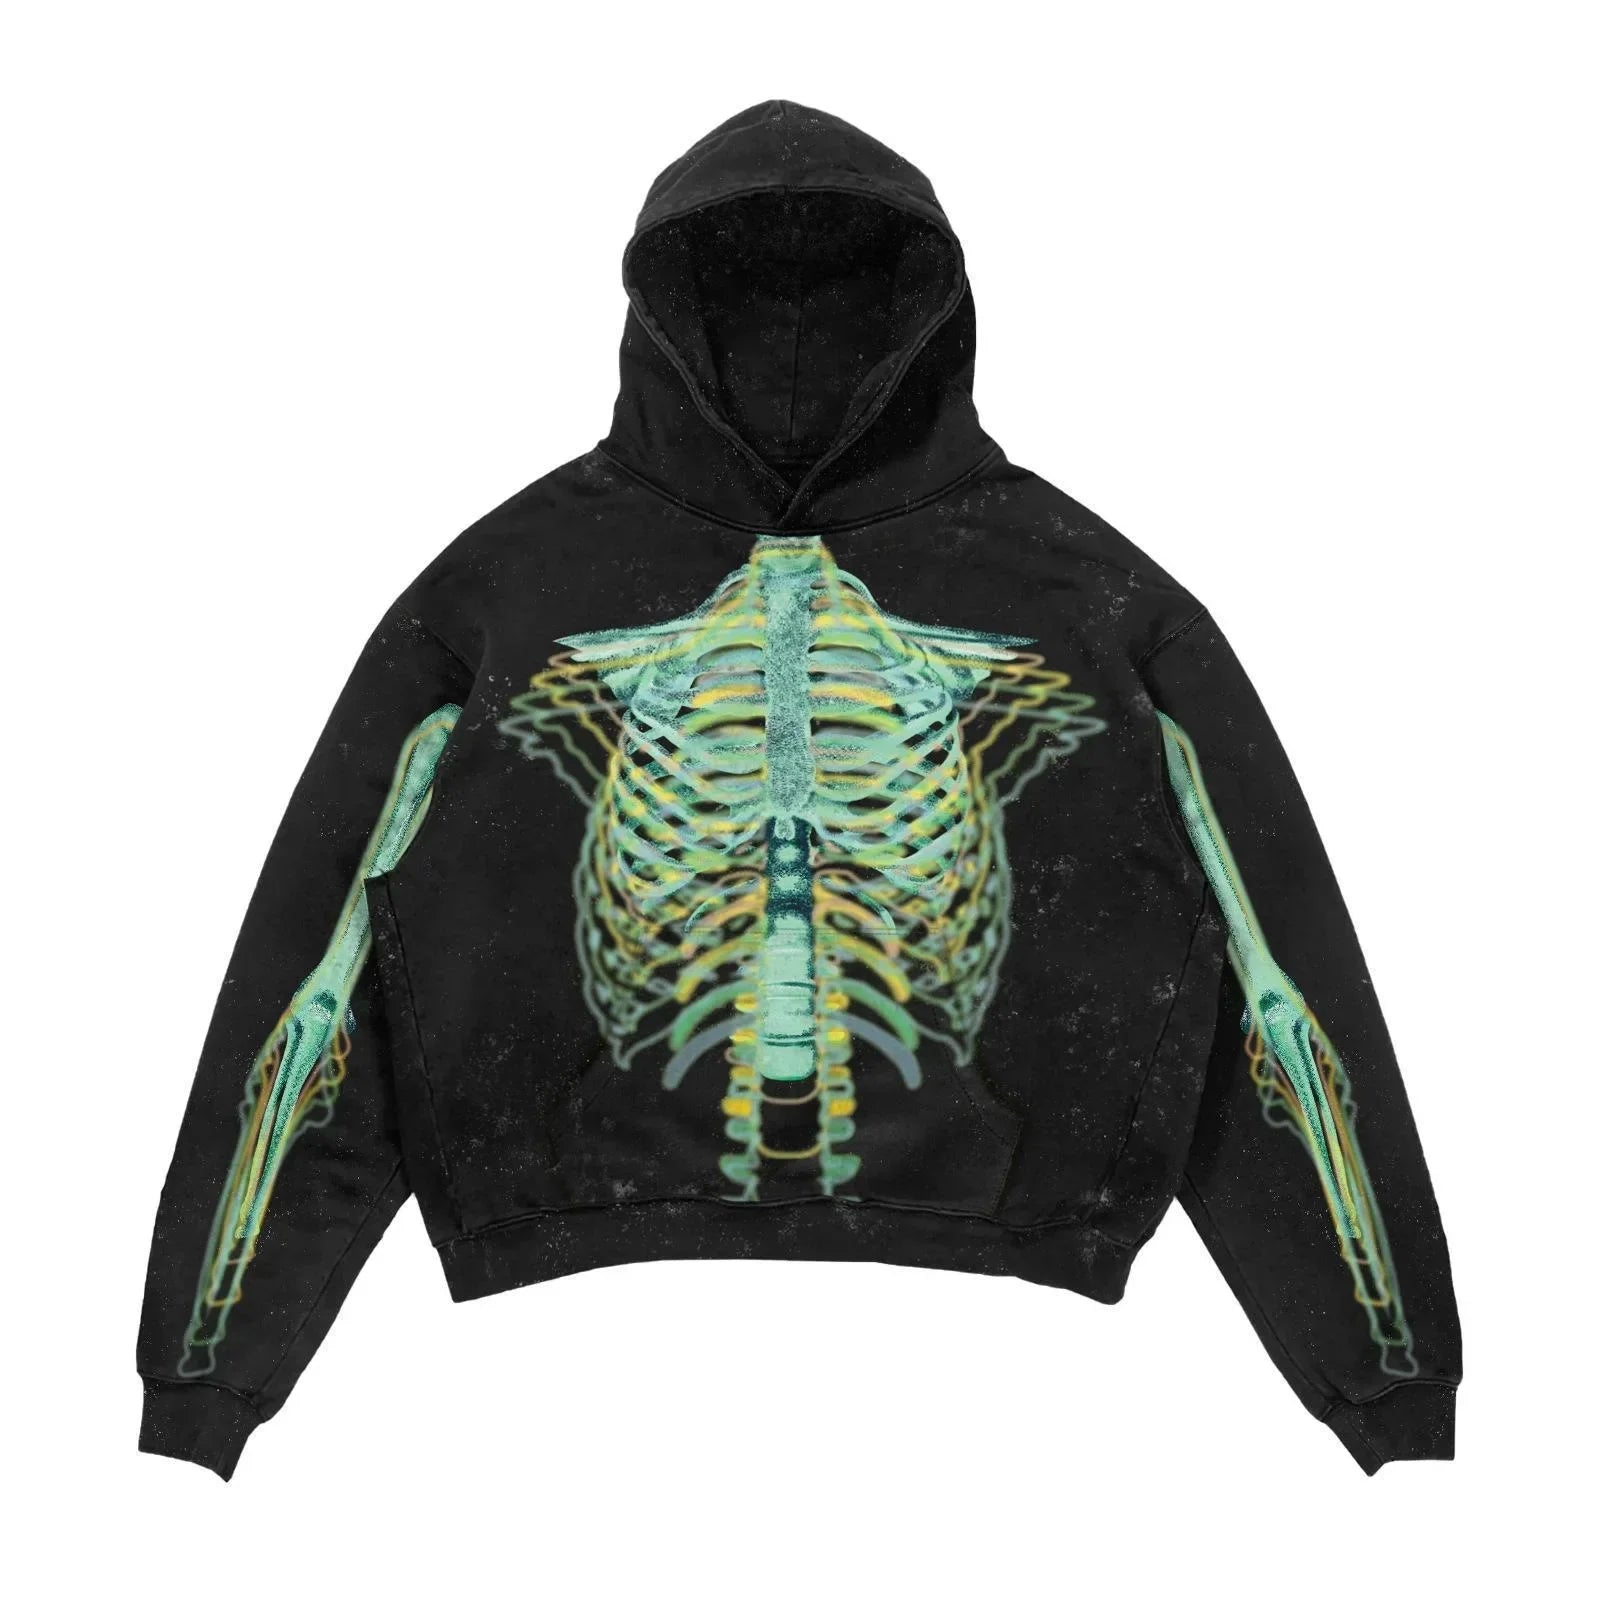 A black Maramalive™ Explosions Printed Skull Y2K Retro Hooded Sweater Coat Street Style Gothic Casual Fashion Hooded Sweater Men's Female featuring a detailed print of a green skeletal ribcage and arms on the front, perfect for those who appreciate punk style in men's clothing.